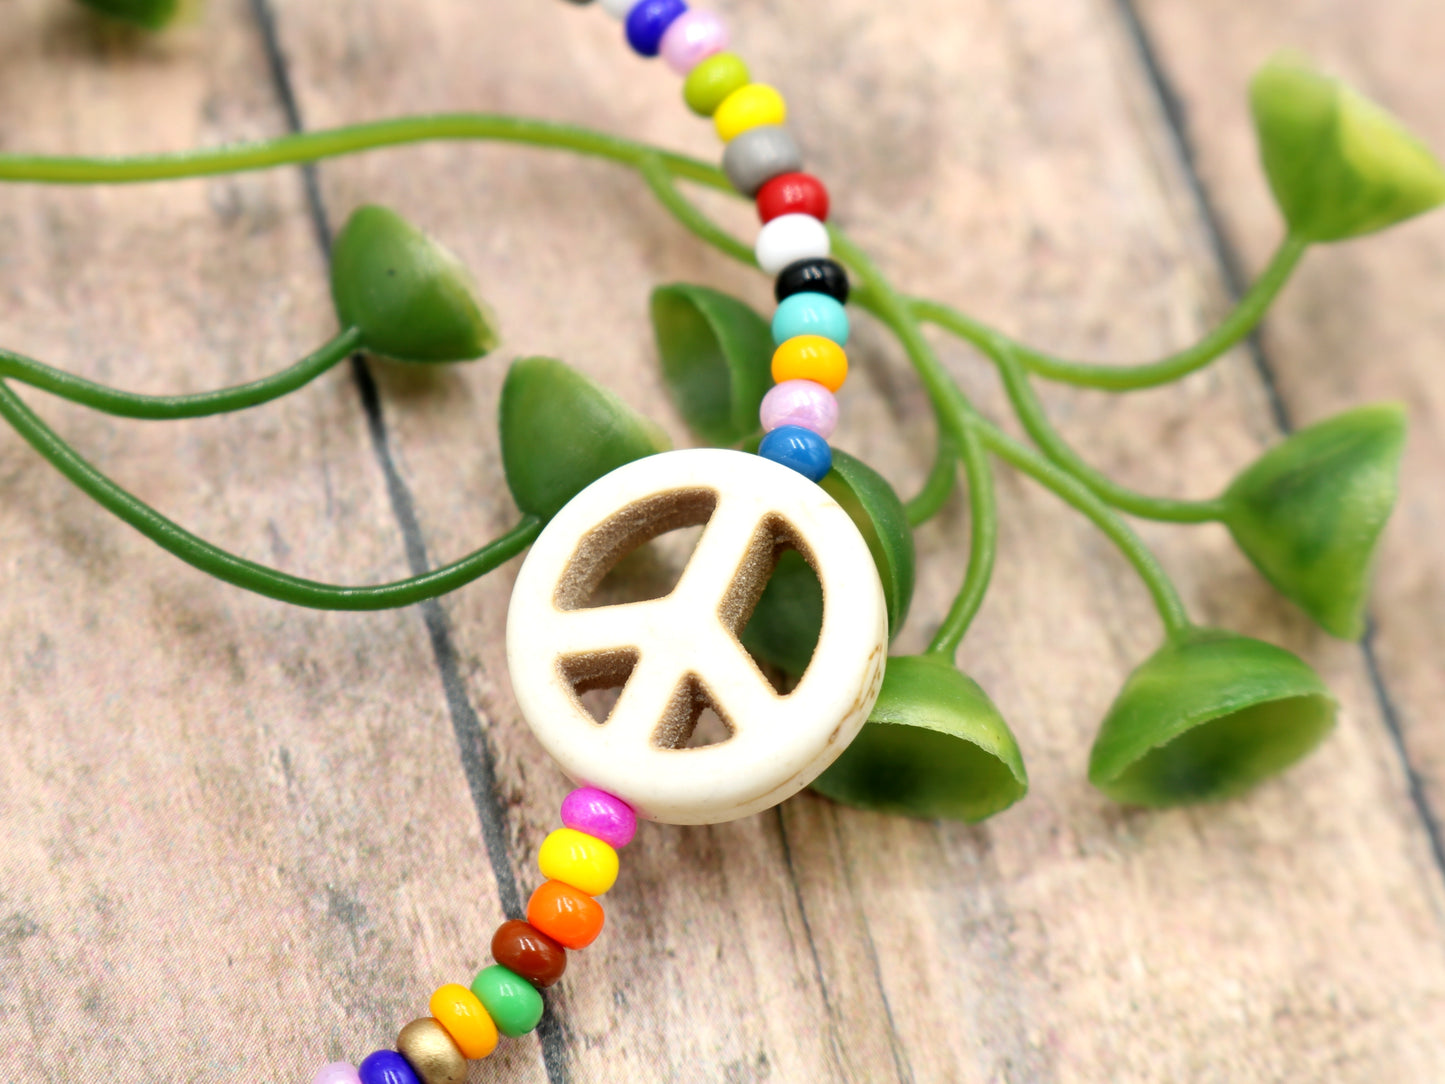 Holler For Howlite  Dove White Peace Be to You Assorted Seed Bead Glass Bracelet by Monkey's Mojo